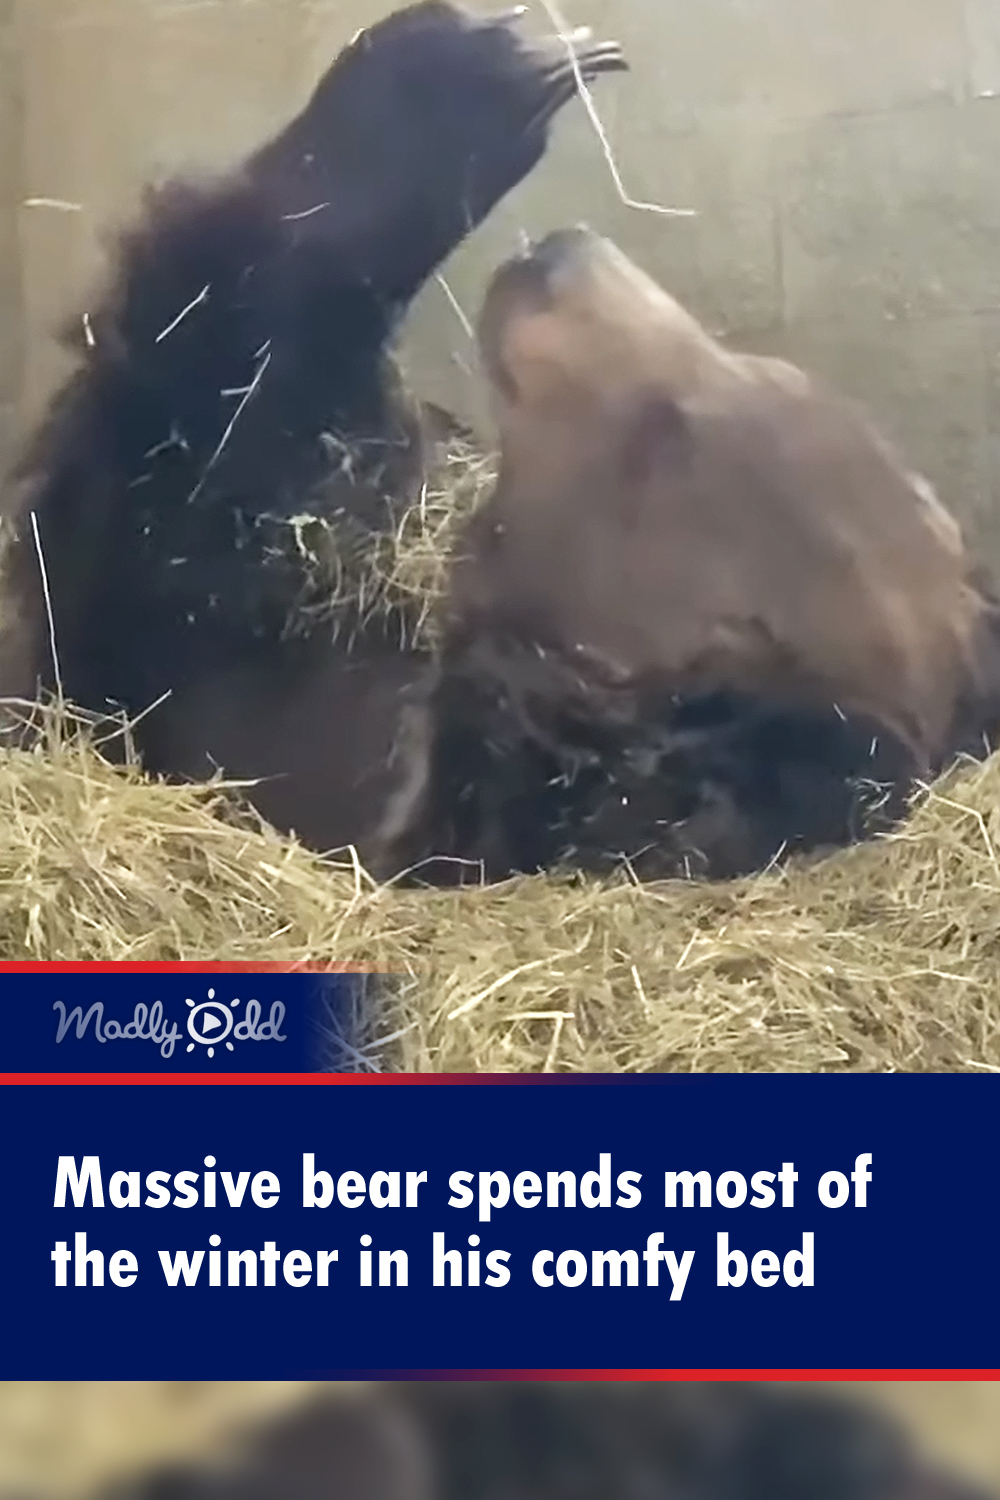 Massive bear spends most of the winter in his comfy bed